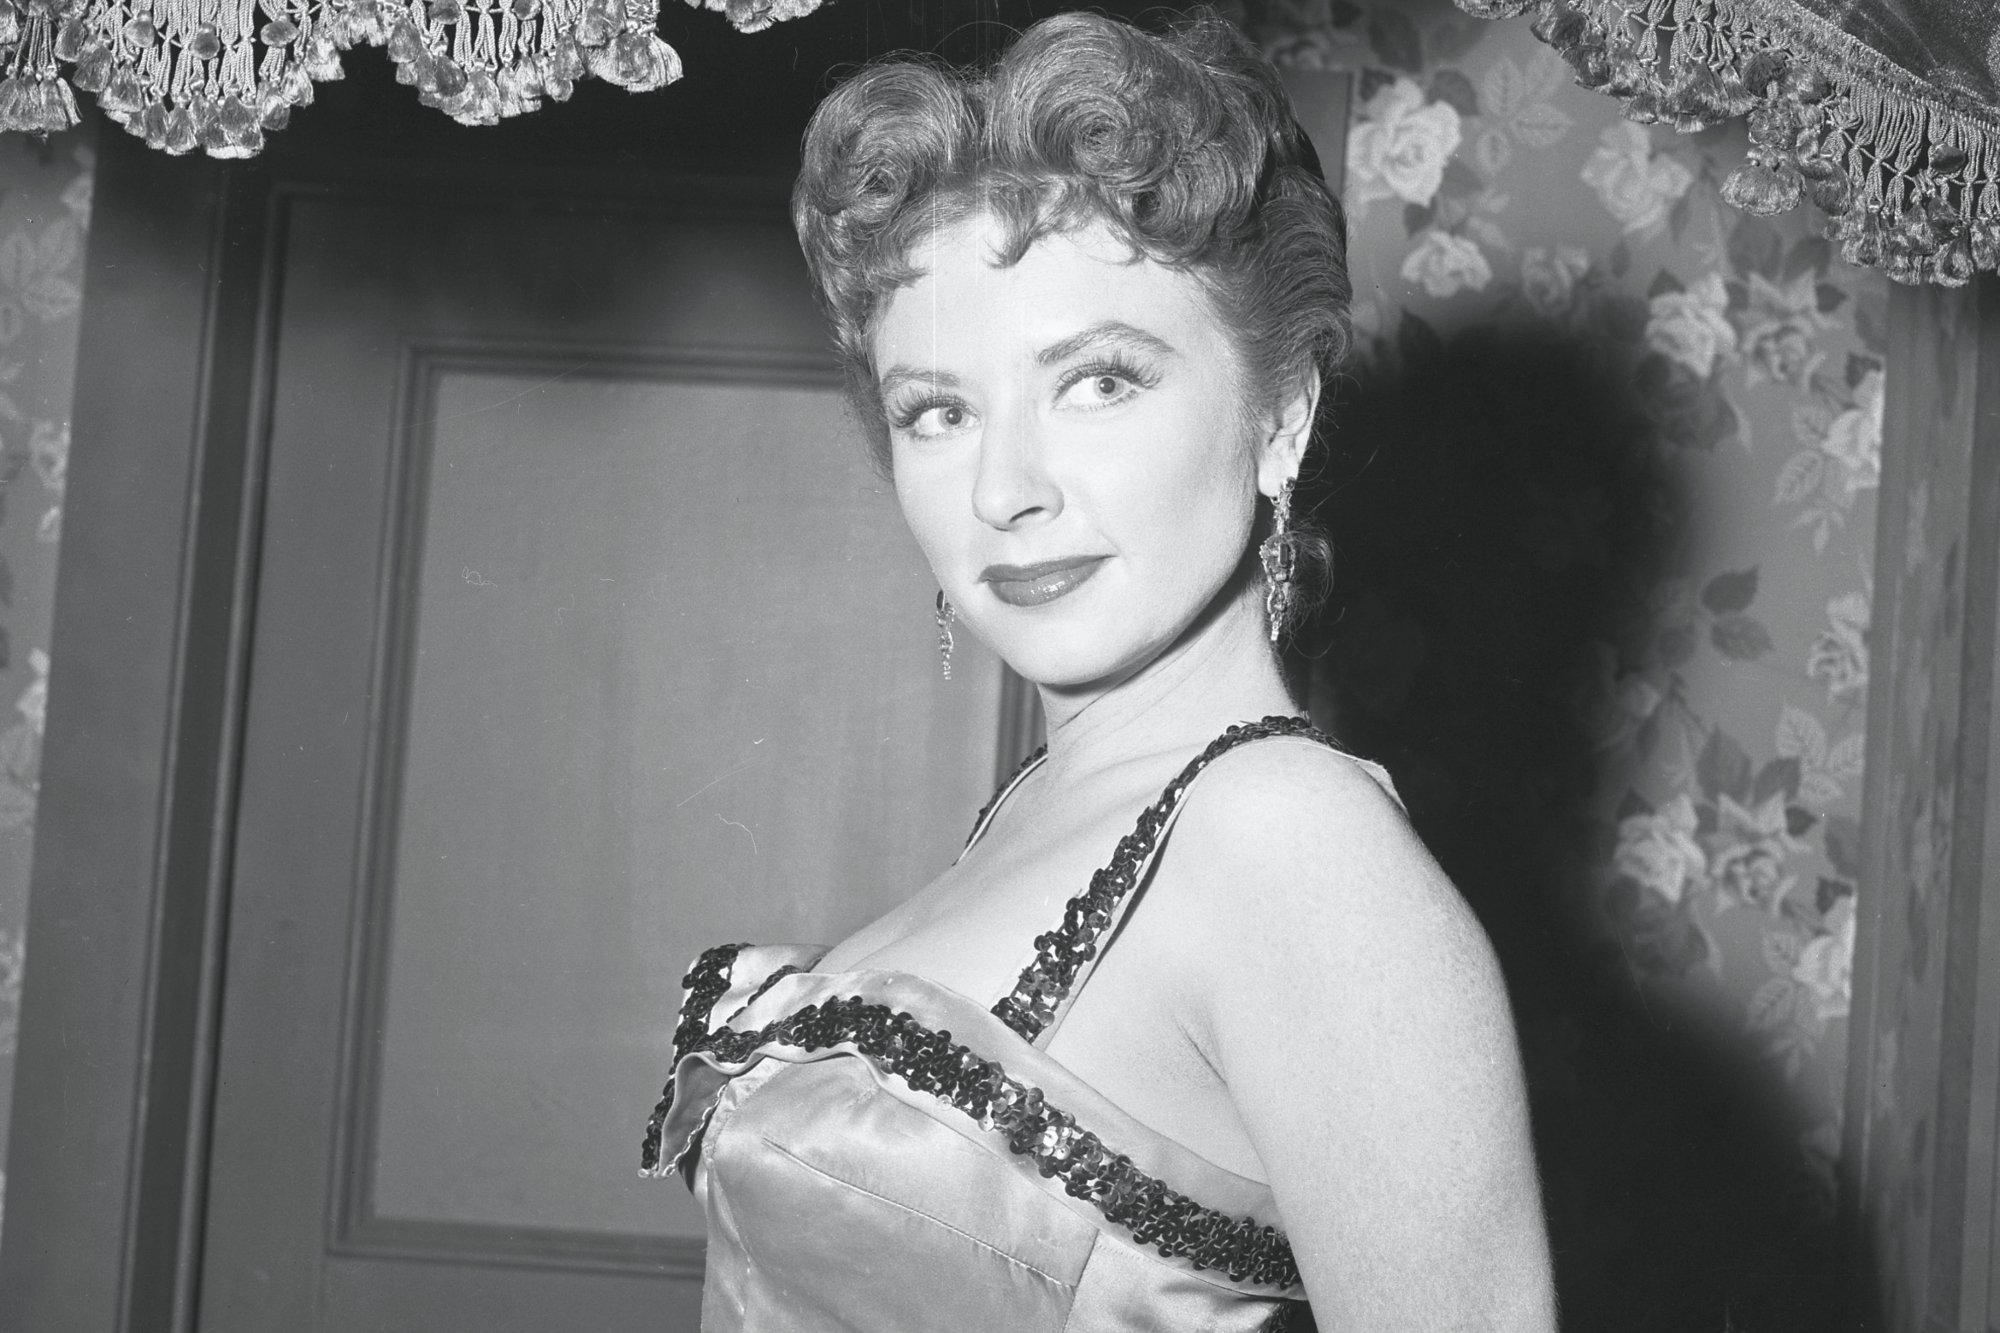 'Gunsmoke' actor Amanda Blake as Miss Kitty Russell leaning back in a satin dress with a smile on her face